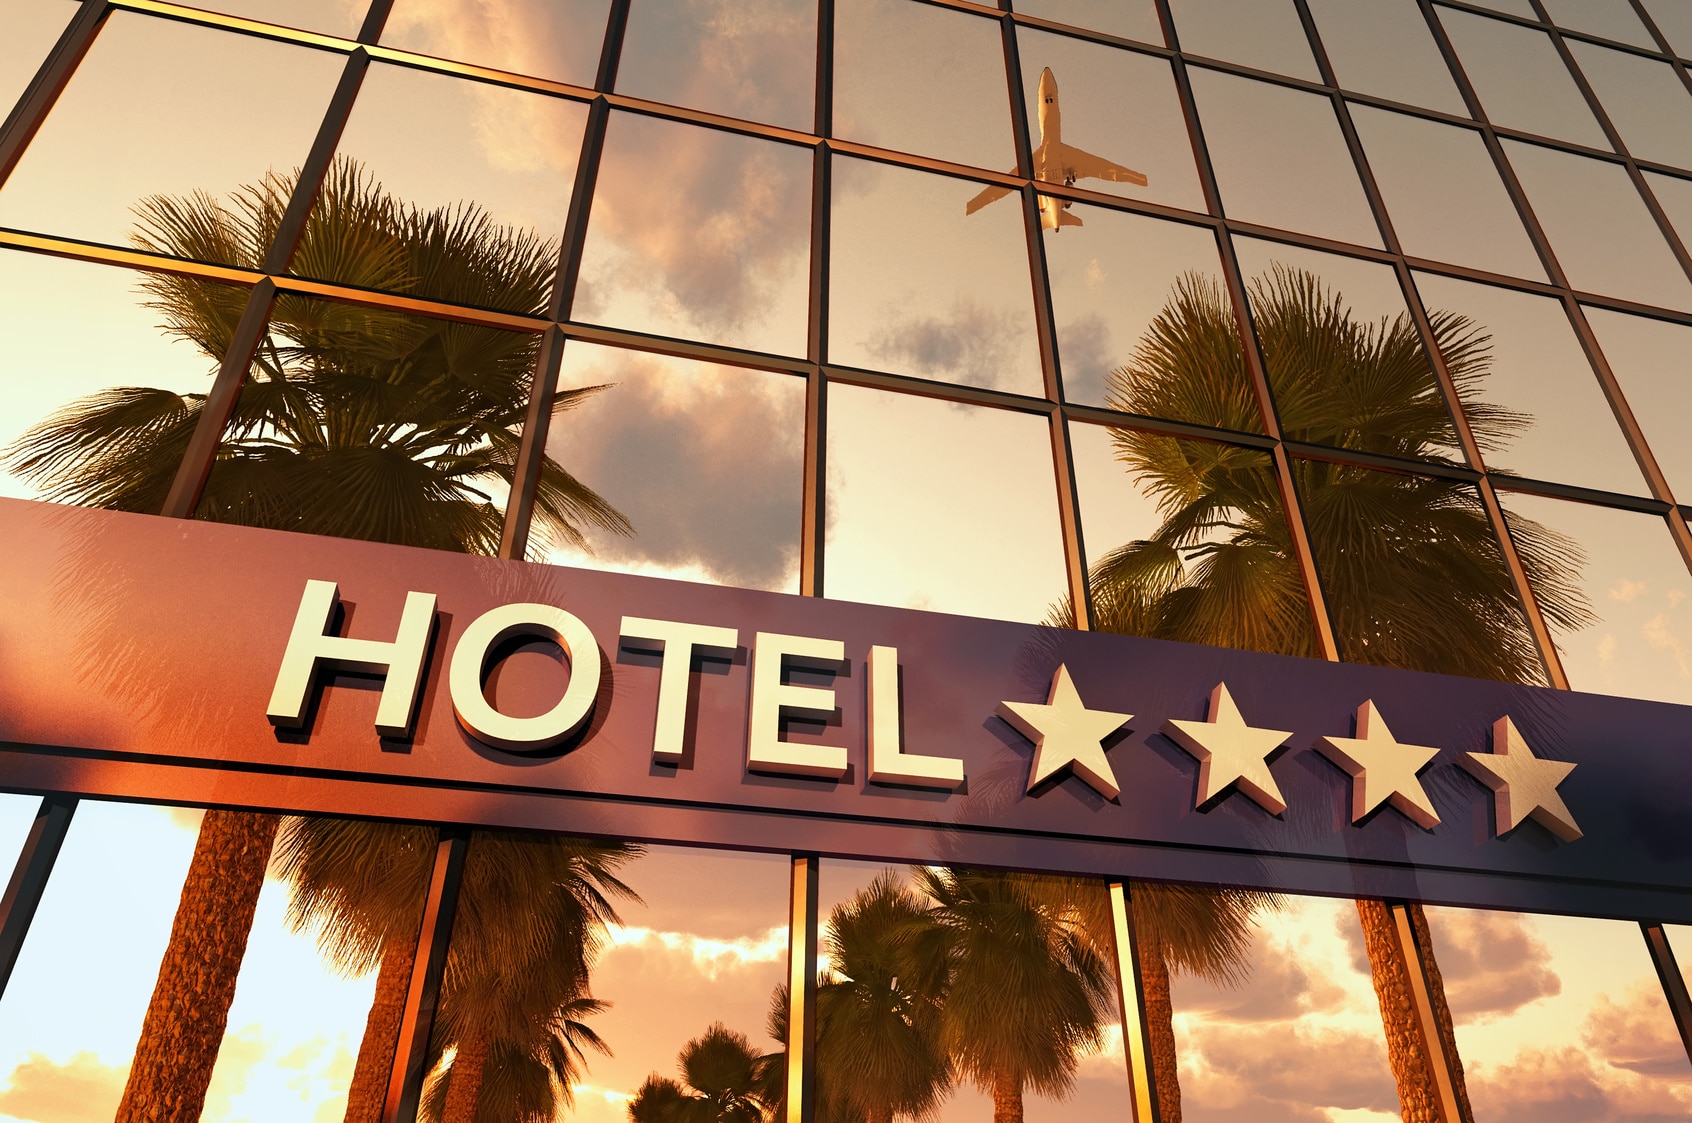 Global Hotel Prices On The Rise